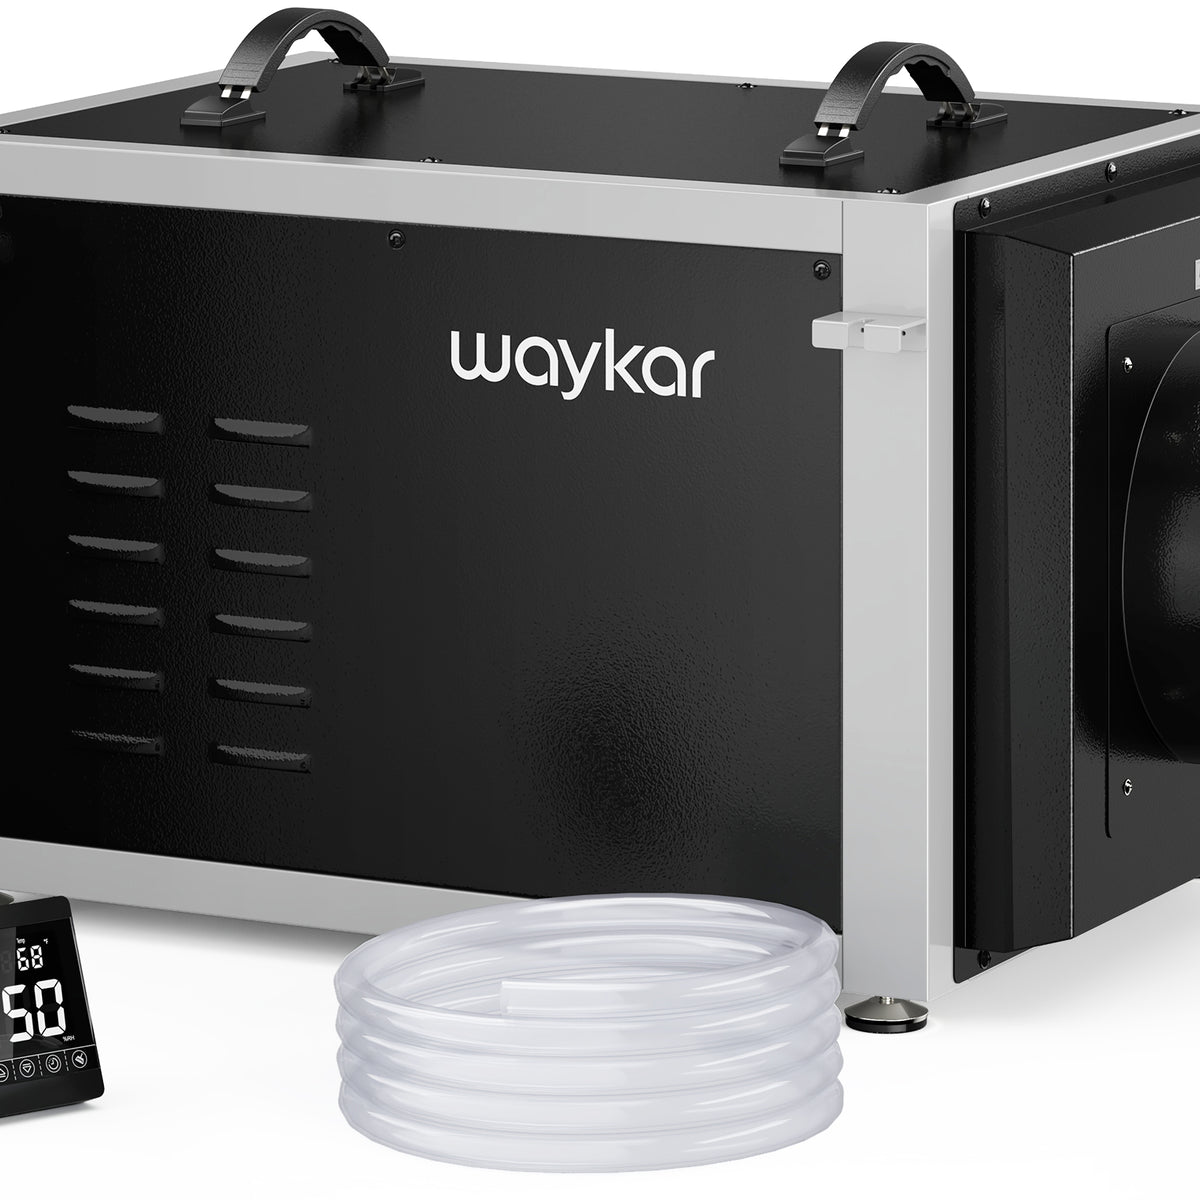 Waykar 158 Pints Commercial Dehumidifier-Hoistable Industrial Dehumidifier with Carrying Handle with Separate Control Panel and Sensor-For 6500 Sq. Ft Crawl Spaces, Basements, Whole Home